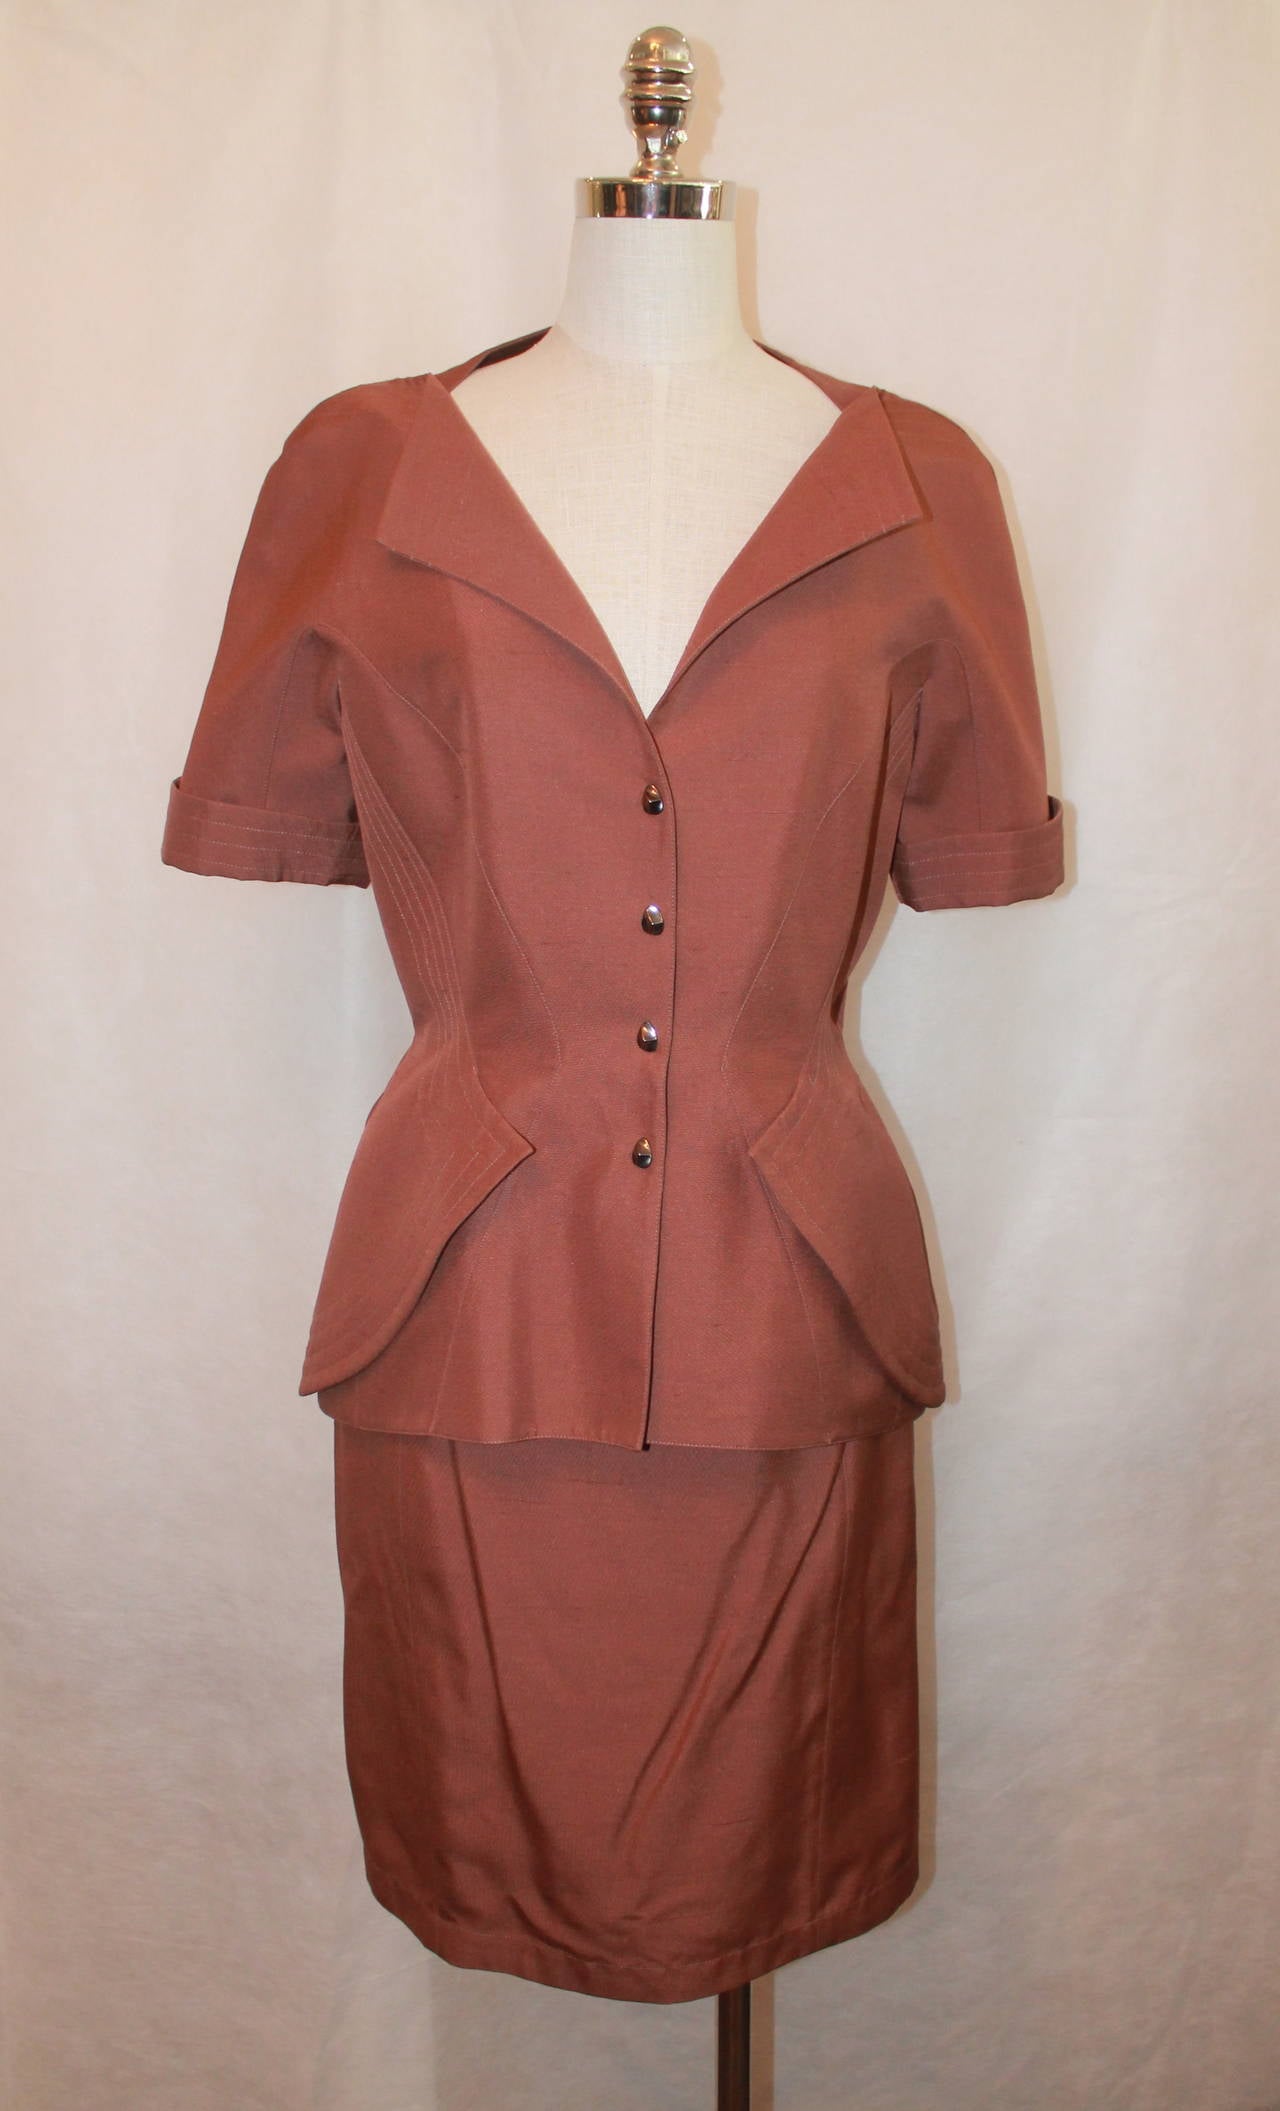 Thierry Mugler 1980's Brown Short Sleeve Skirt Suit - 44. This piece is in excellent vintage condition with light wear. It is 100% acetate with a silk lining. The front of the jacket also has 2 accent flaps. 

Measurements:

Jacket
Bust- up to